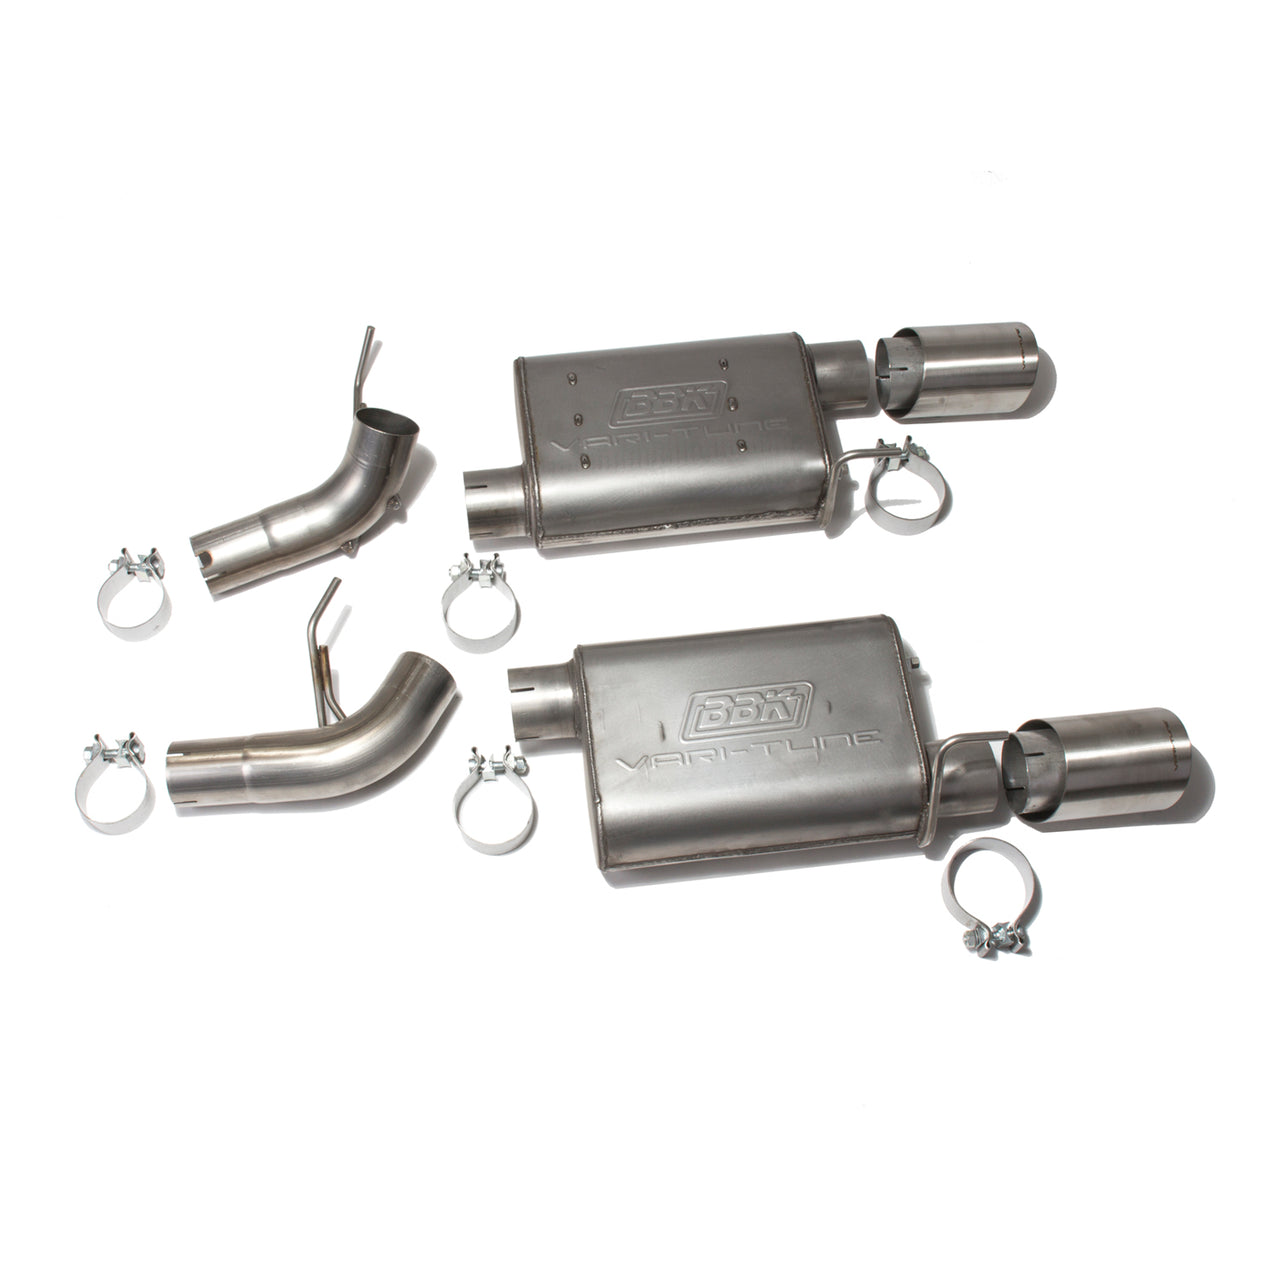 2005-2010 MUSTANG GT 4.6L VARITUNE AXLE BACK EXHAUST KIT (STAINLESS)